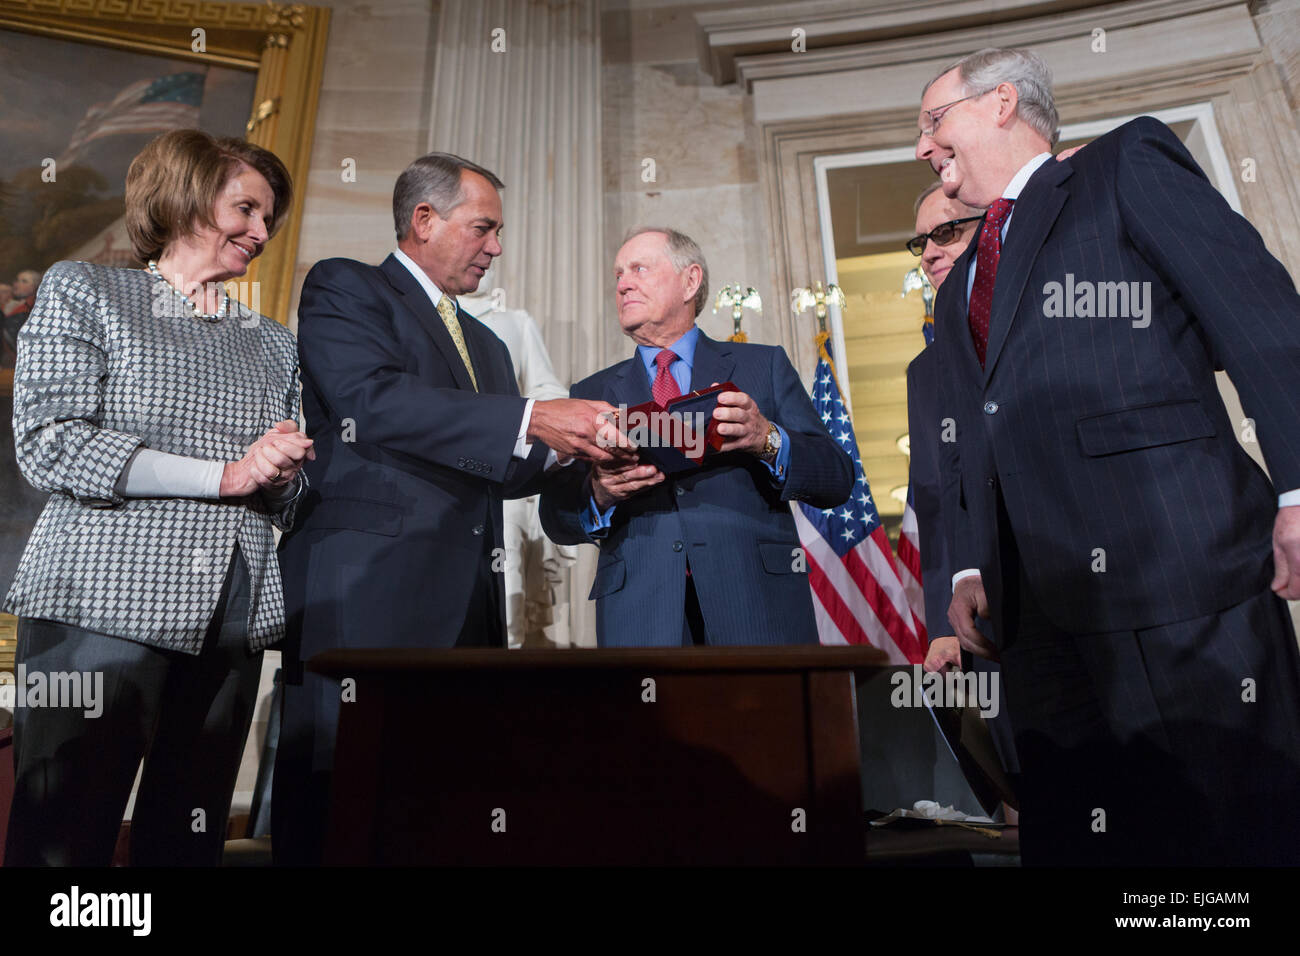 US Congressional leaders present a Congressional Gold Medal to golfer Jack Nicklaus for his promotion of excellence, good sportsmanship, and philanthropy during a ceremony March 24, 2015 in Washington, DC. From left to right: House Minority Leader Nancy Pelosi, Speaker John Boehner, Jack Nicklaus, Senate Minority Leader Harry Reid and Senate Majority Leader Mitch McConnell. Stock Photo